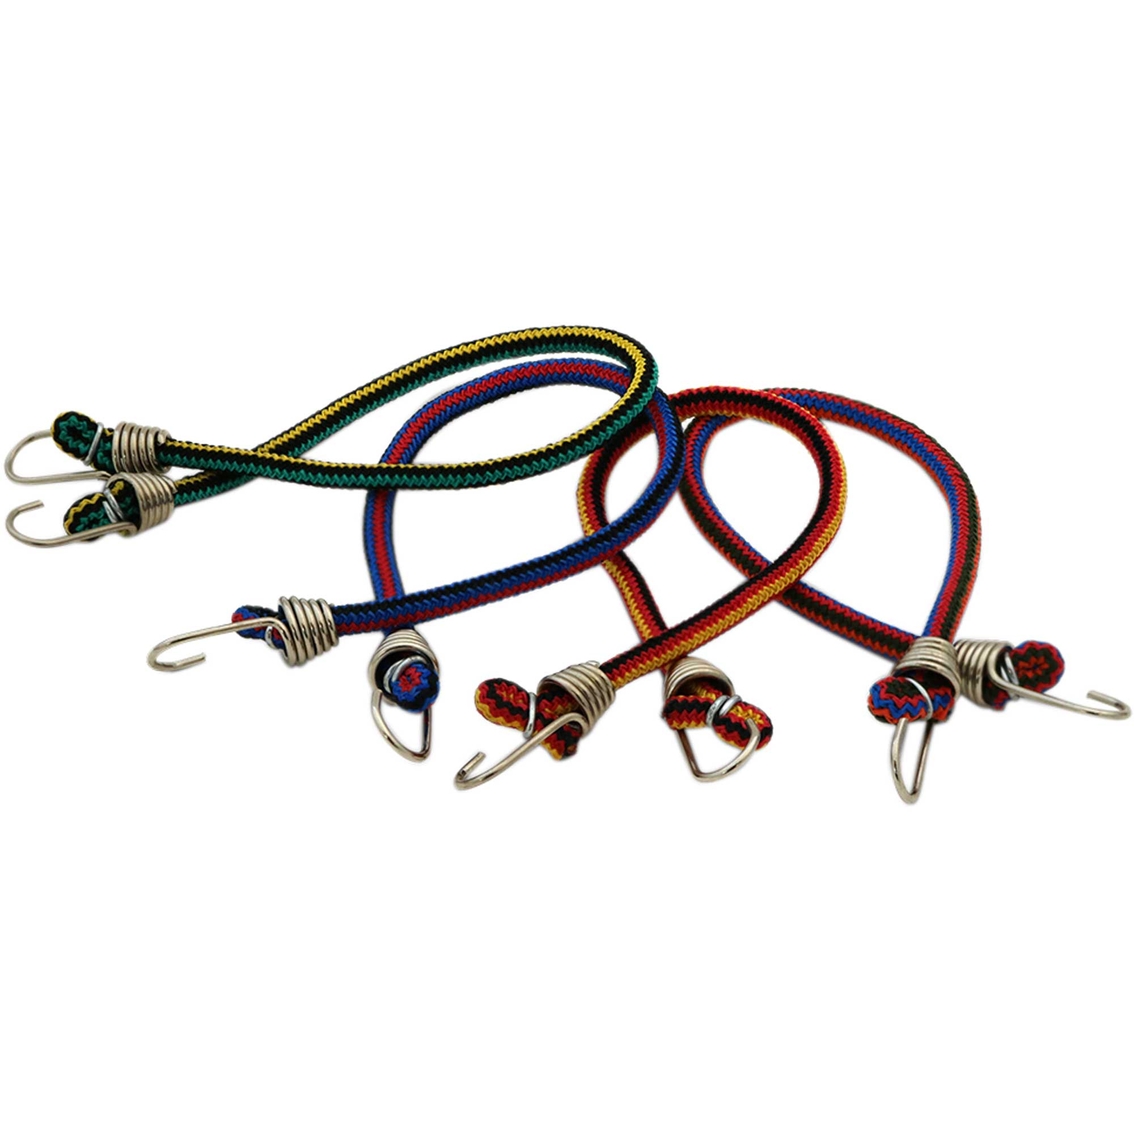 Coghlans 10 in. Mini Stretch Cord 4 pk. - Image 2 of 2